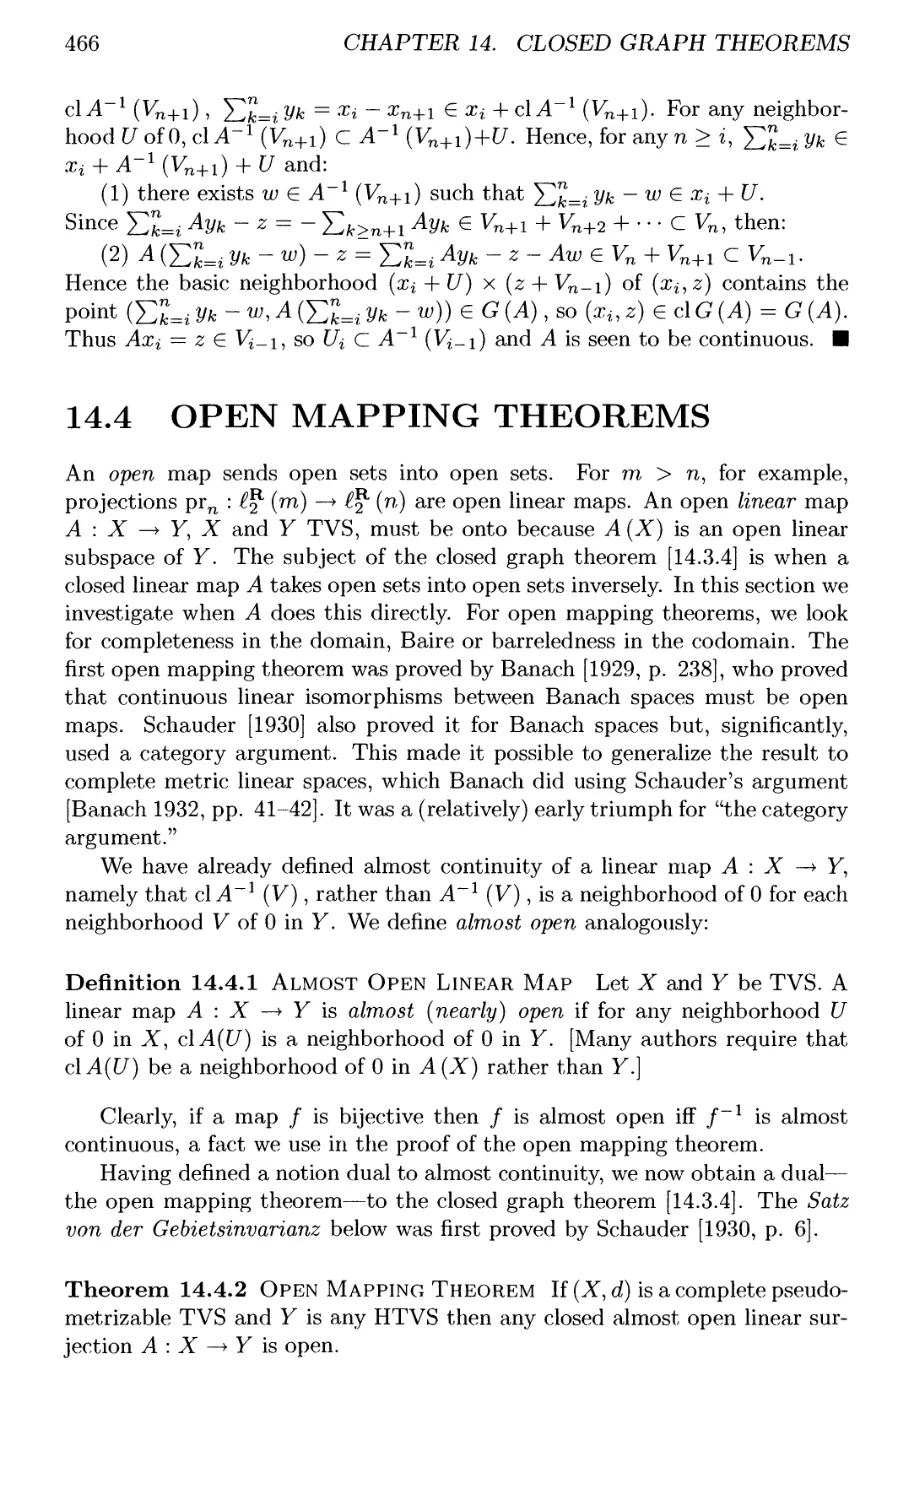 14.4 OPEN MAPPING THEOREMS